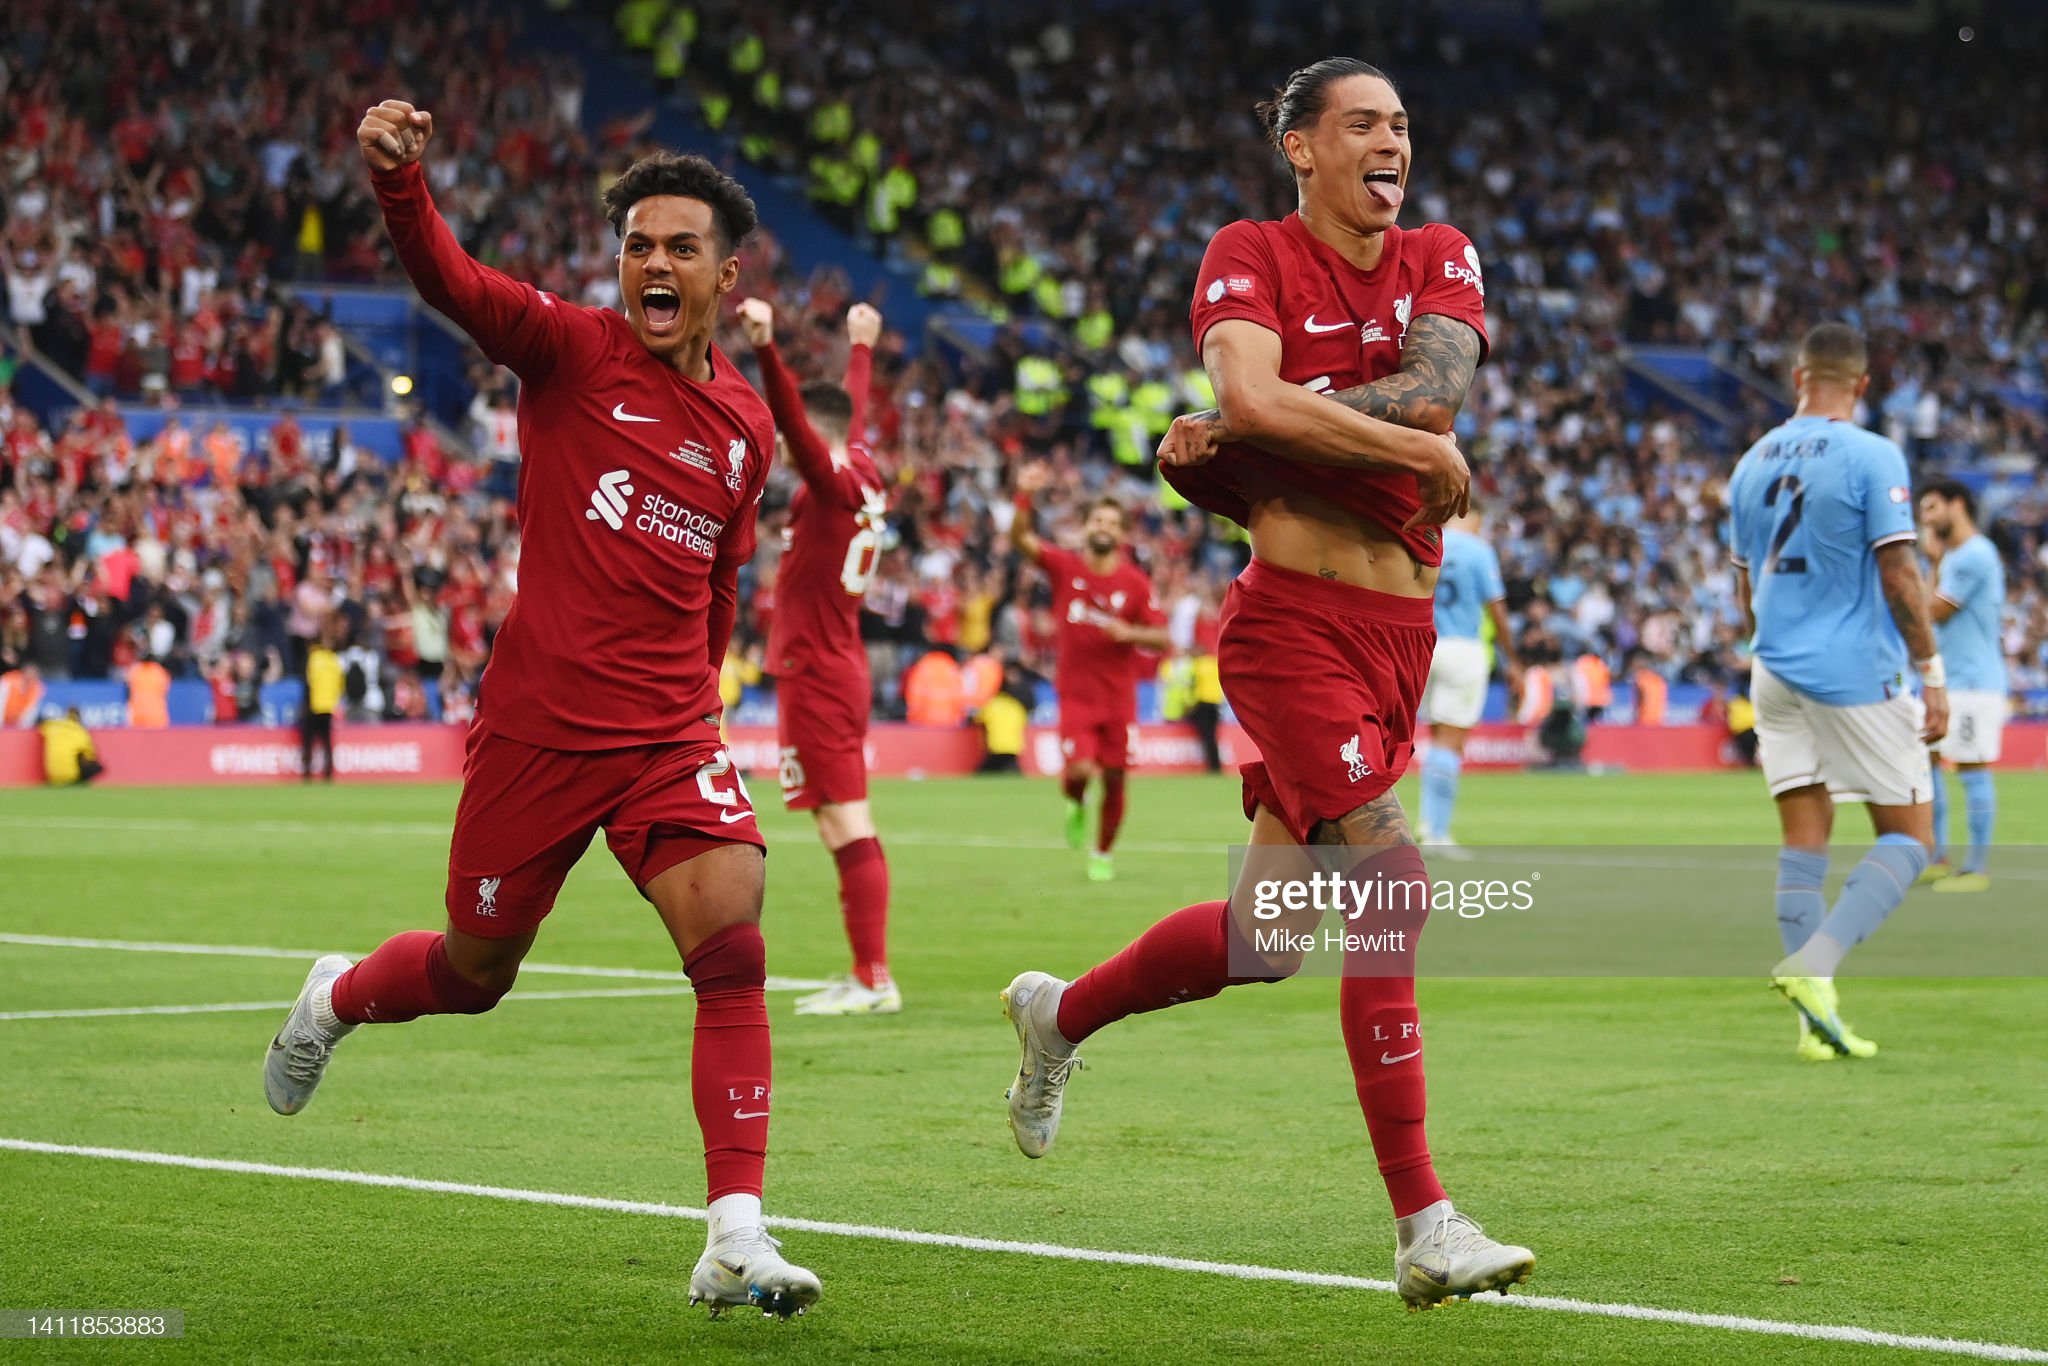 LEICESTER, ENGLAND - JULY 30: Darwin Nunez of Liverpool celebrates scoring their side's third goal with teammate Fabio Carvalho during The FA Community Shield between Manchester City and Liverpool FC at The King Power Stadium on July 30, 2022 in Leicester, England. (Photo by Mike Hewitt/Getty Images)